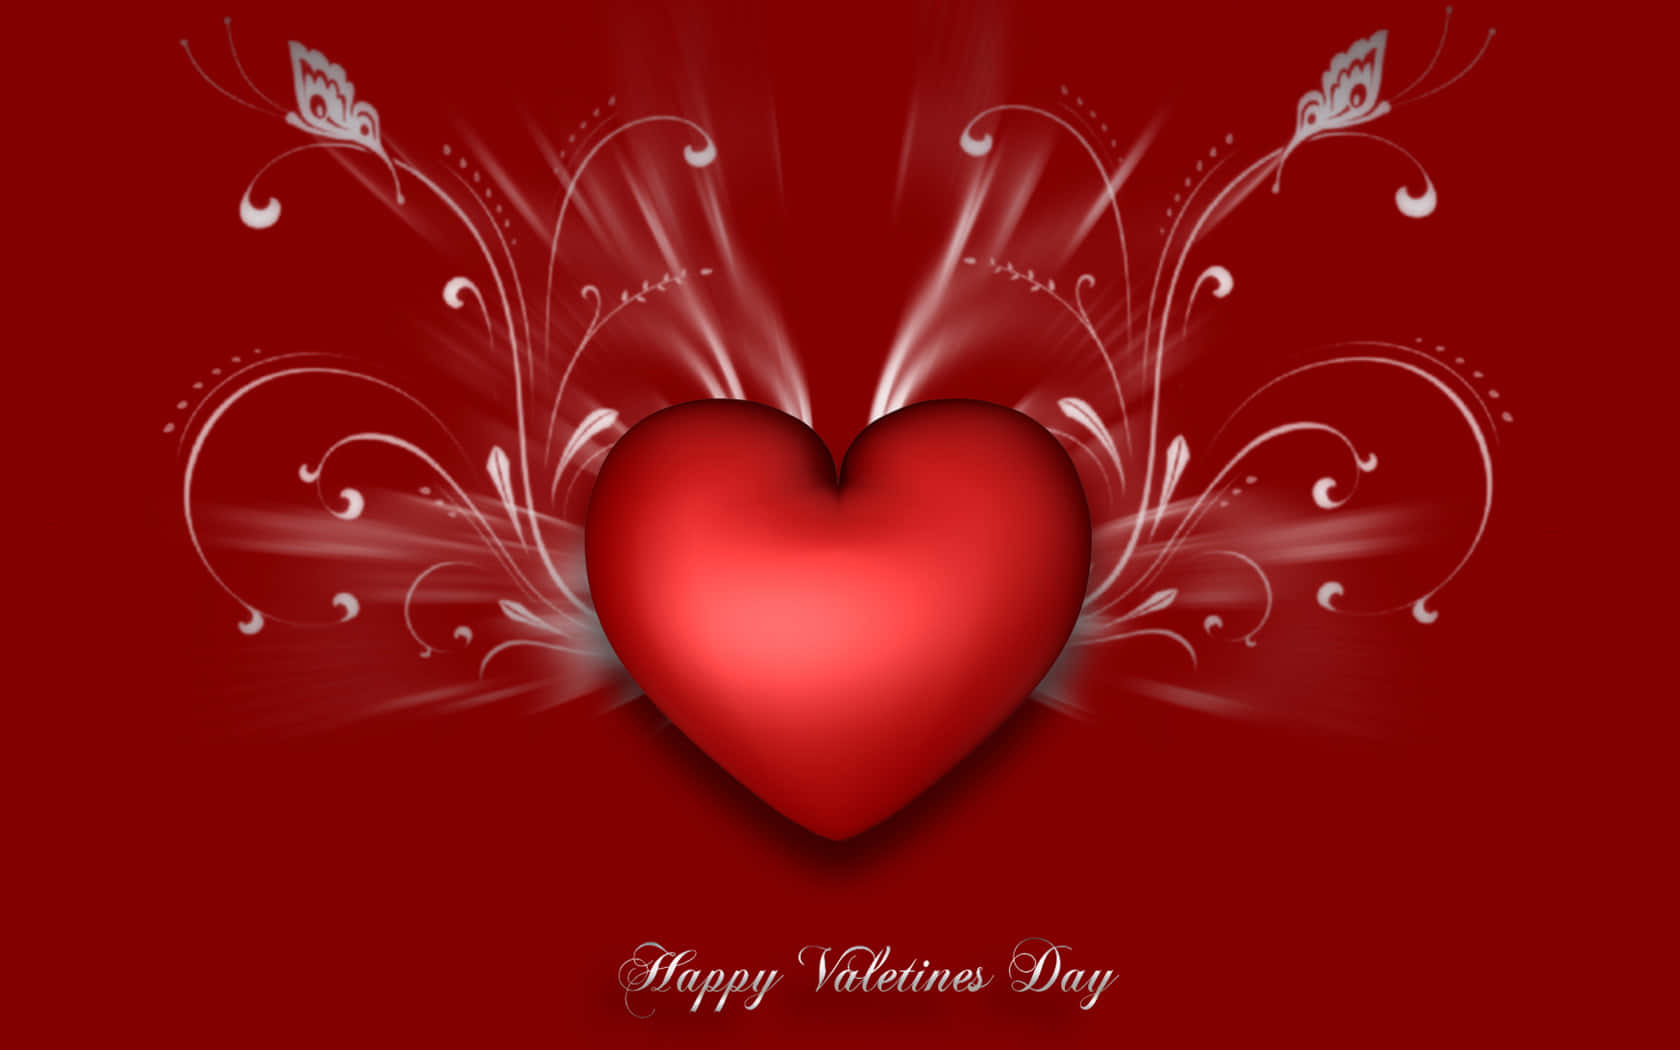 Romantic Happy Valentine's Day Background with Hearts and Love Typography